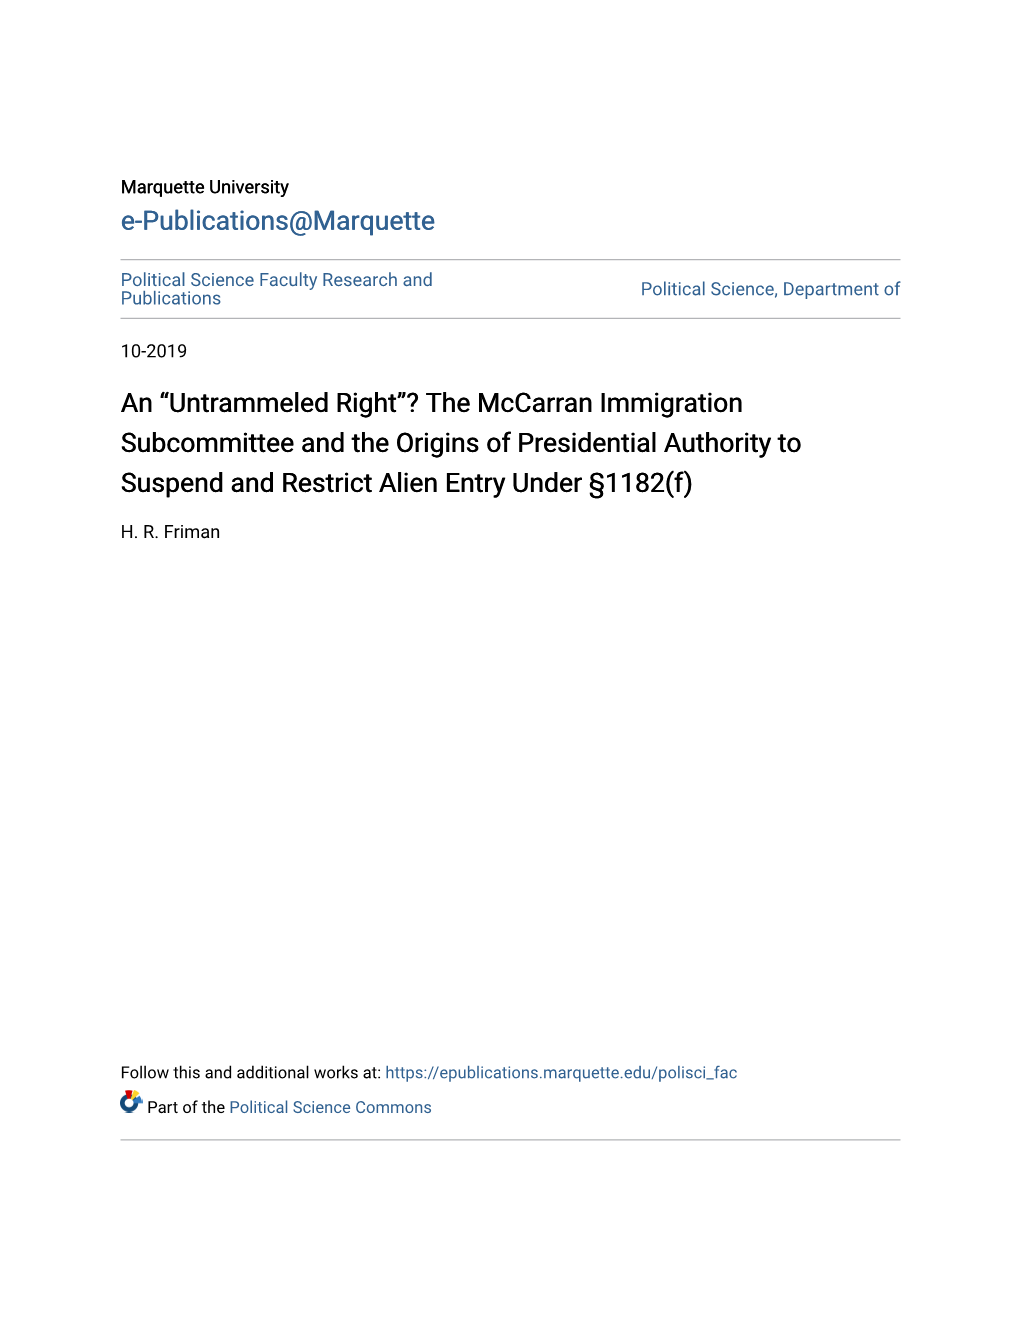 The Mccarran Immigration Subcommittee and the Origins of Presidential Authority to Suspend and Restrict Alien Entry Under §1182(F)